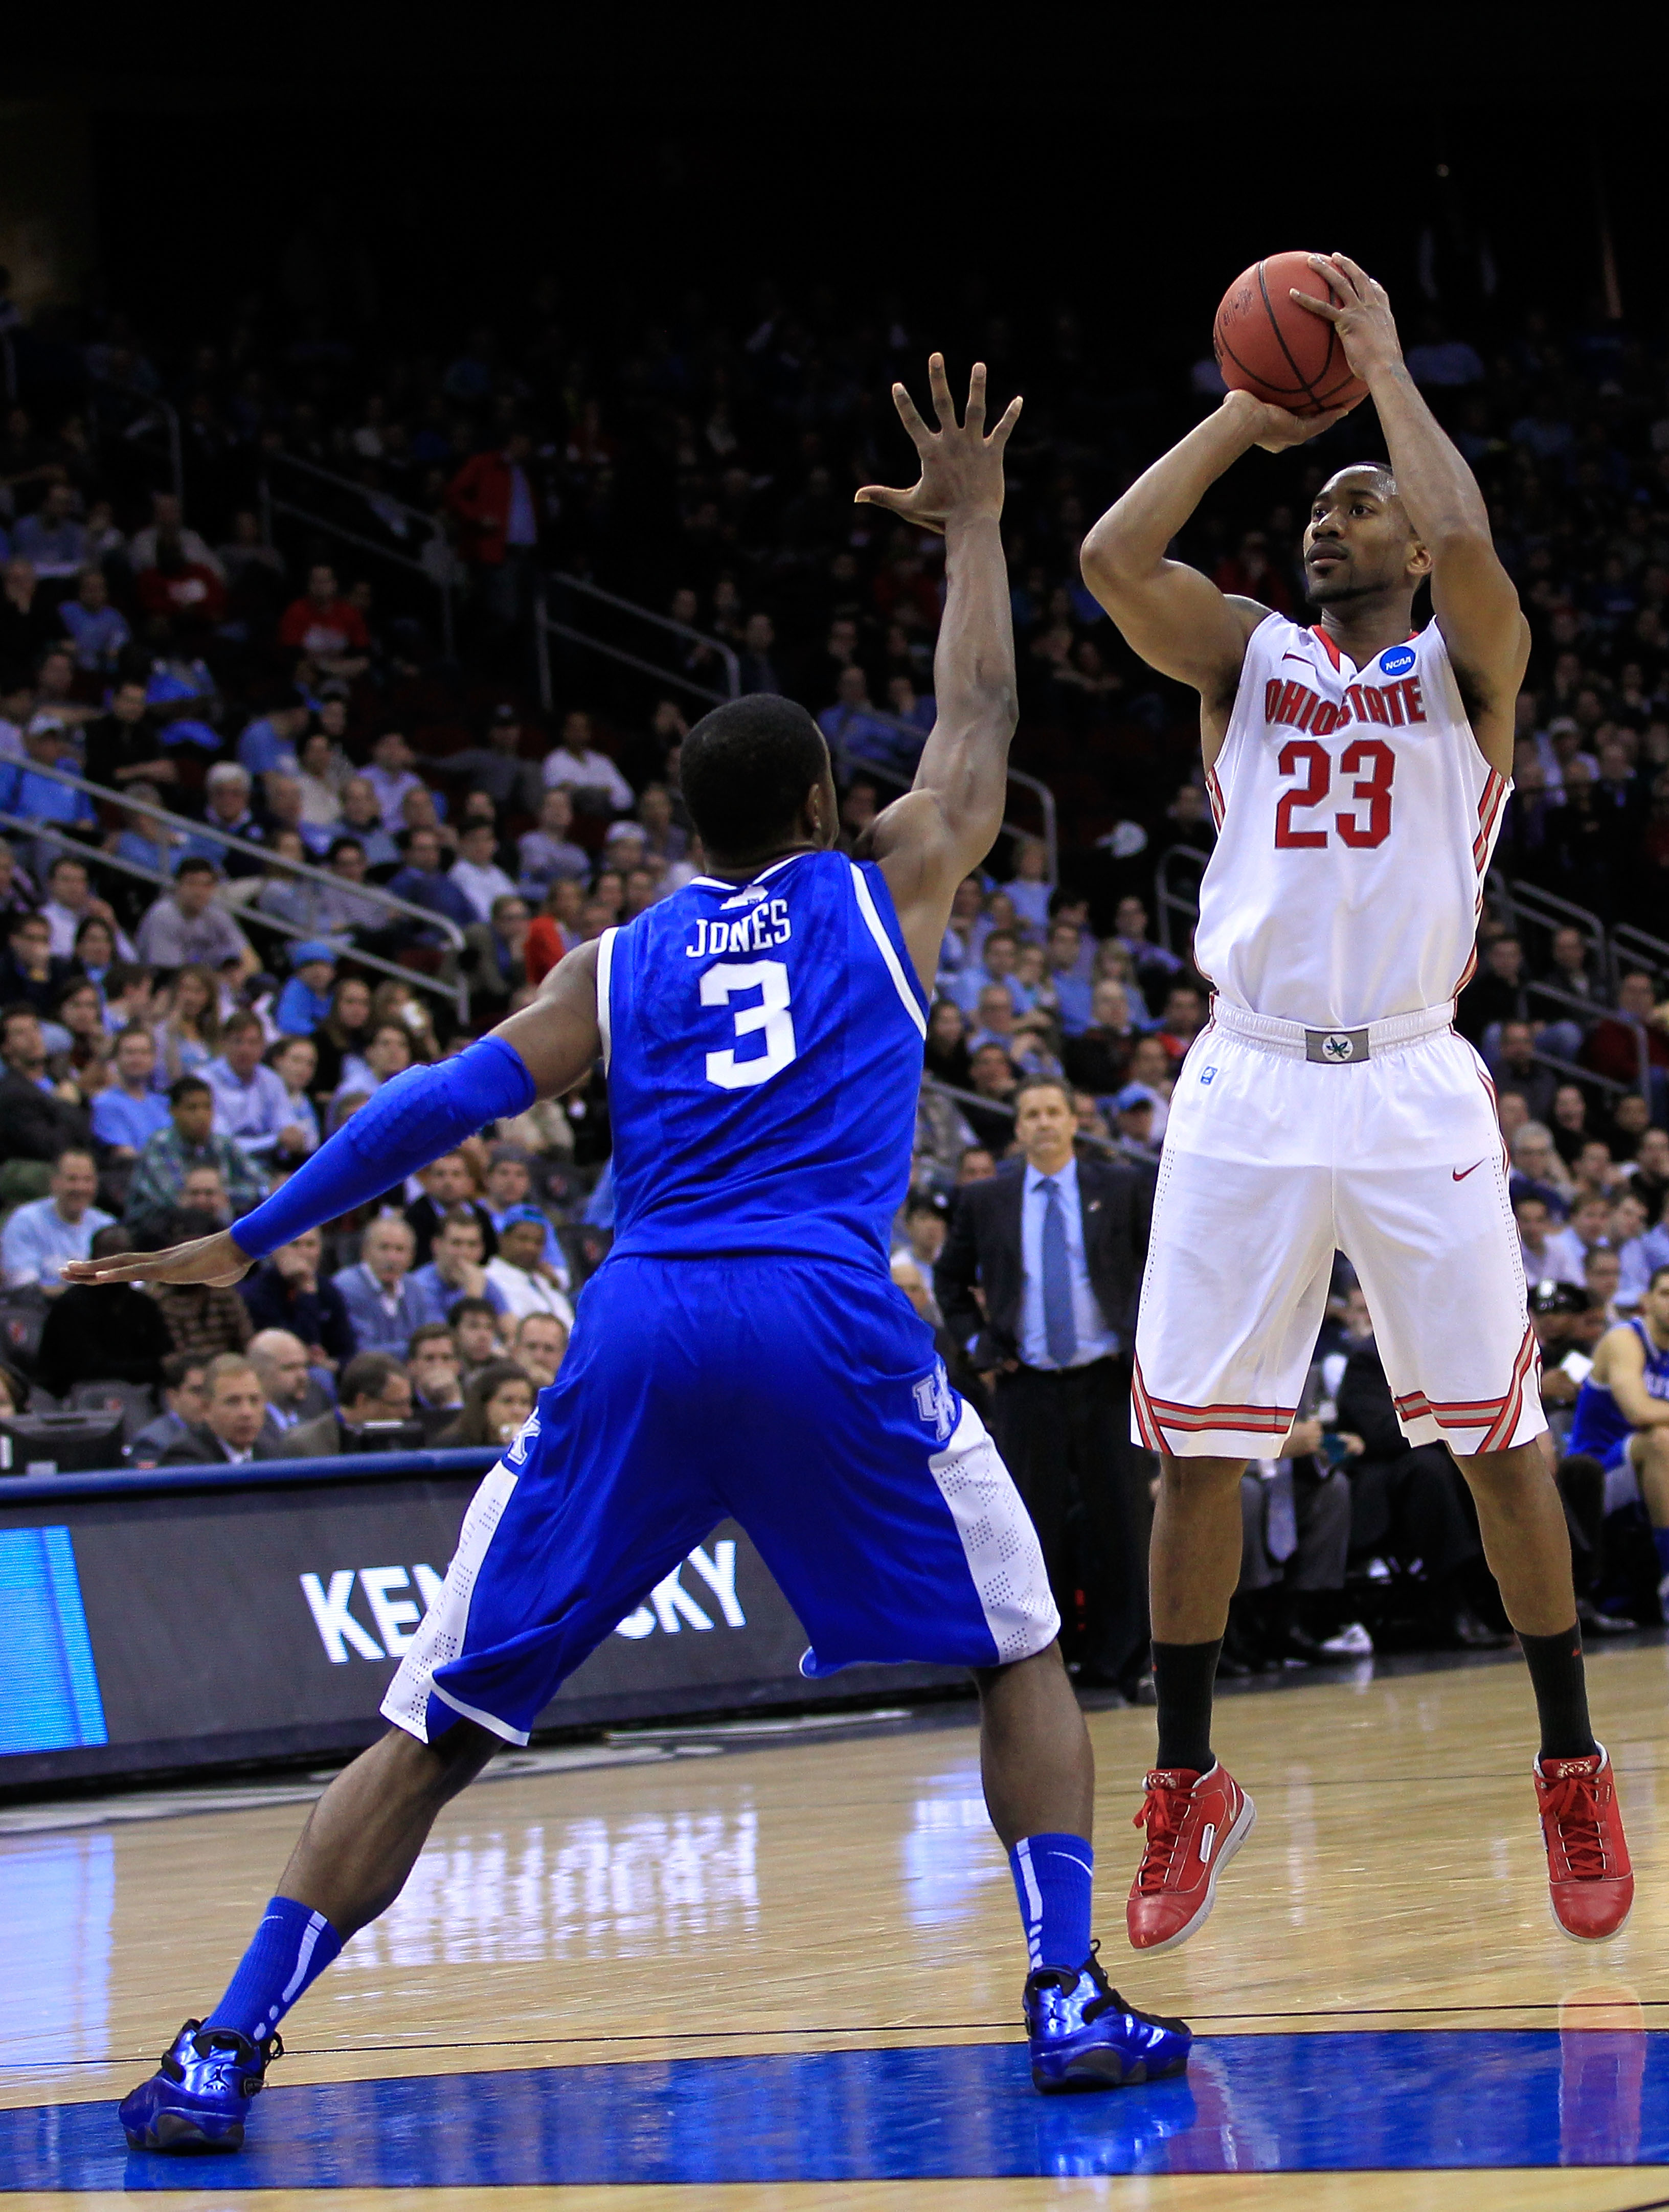 NEWARK, NJ - MARCH 25:  David Lighty #23 of the Ohio State Buckeyes in action against Terrence Jones #3 of the Kentucky Wildcats during the east regional semifinal of the 2011 NCAA Men's Basketball Tournament at the Prudential Center on March 25, 2011 in